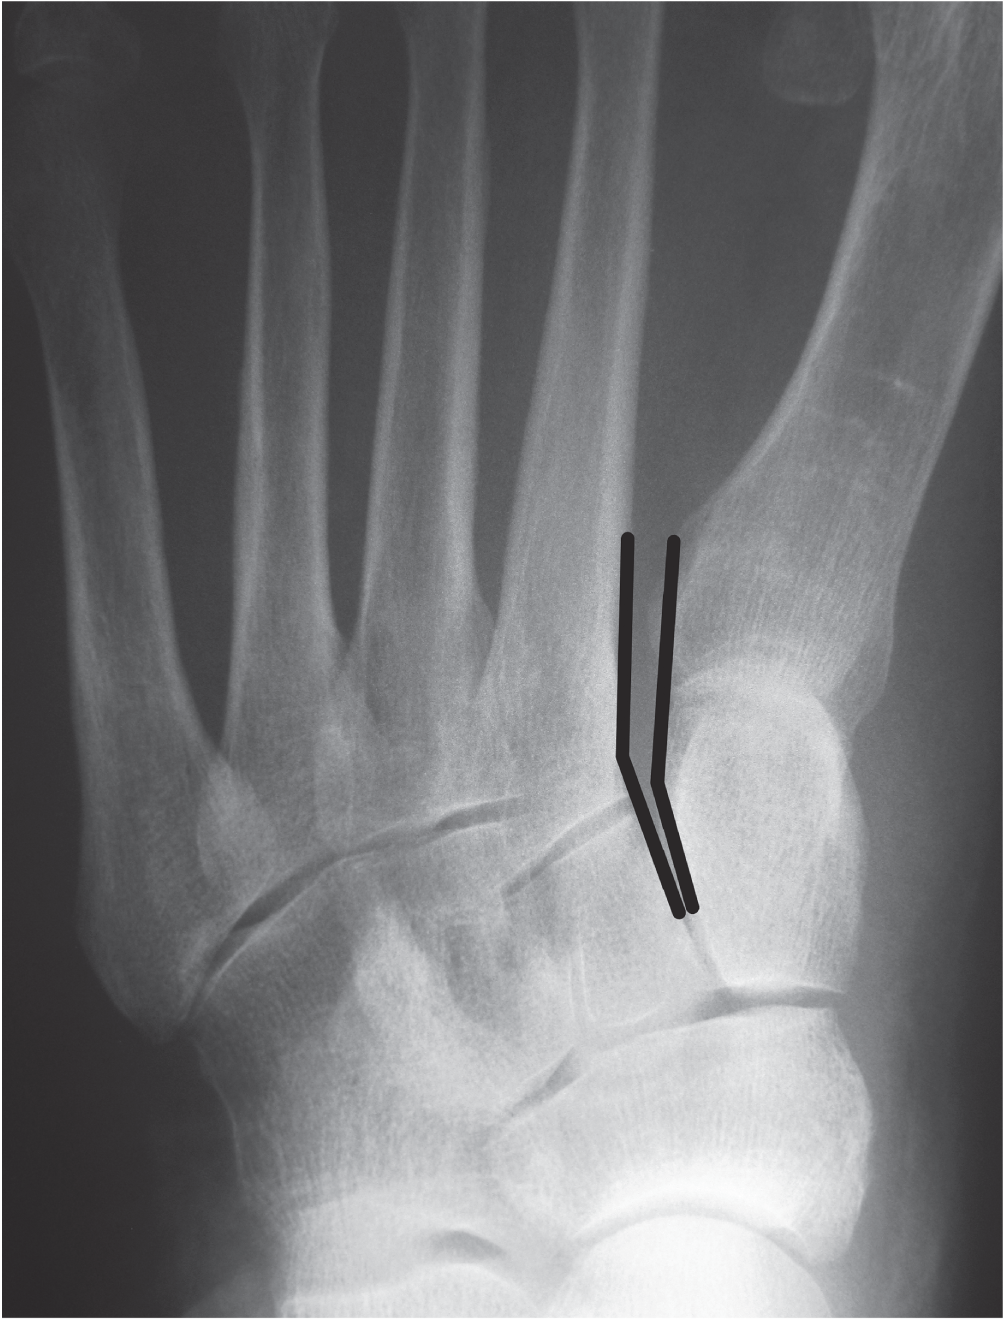 Photo depicts anteroposterior view showing alignment of the lateral borders of the first metatarsal and the medial cuneiform as well as the medial borders of the second metatarsal and the middle cuneiform.